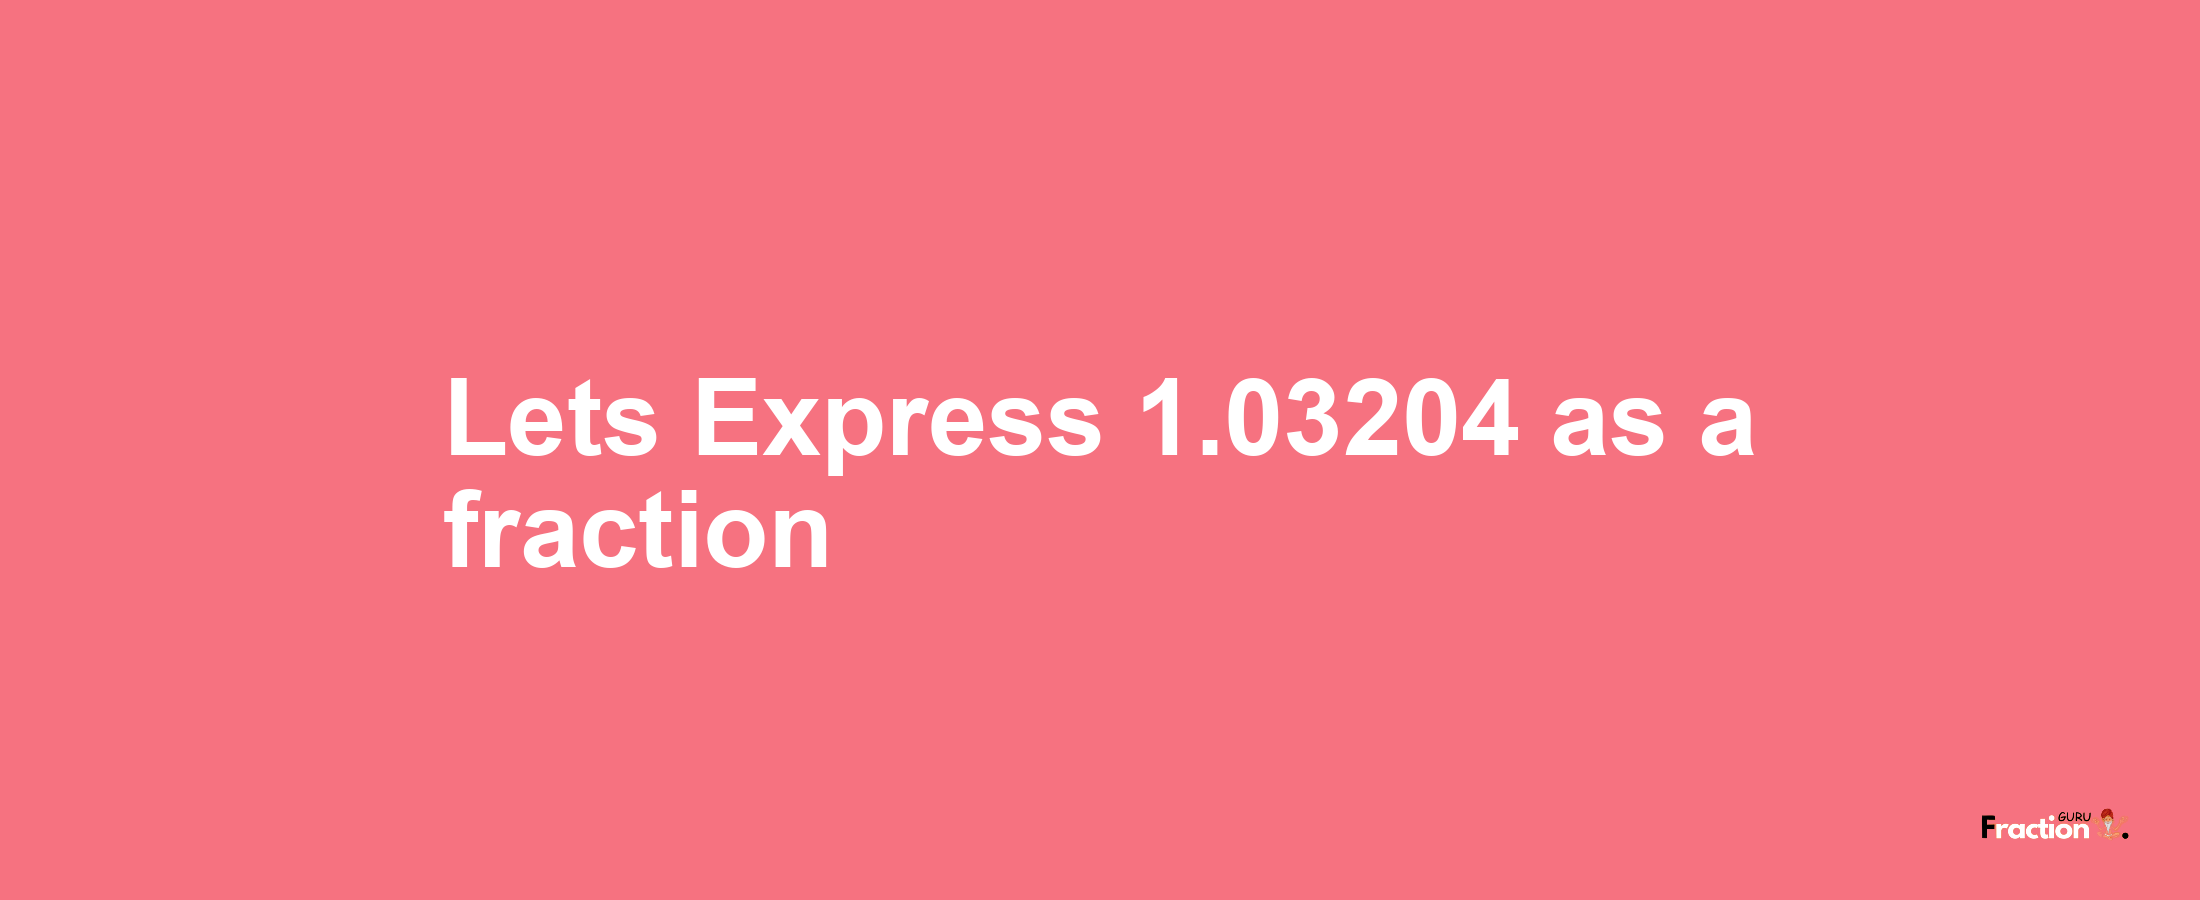 Lets Express 1.03204 as afraction